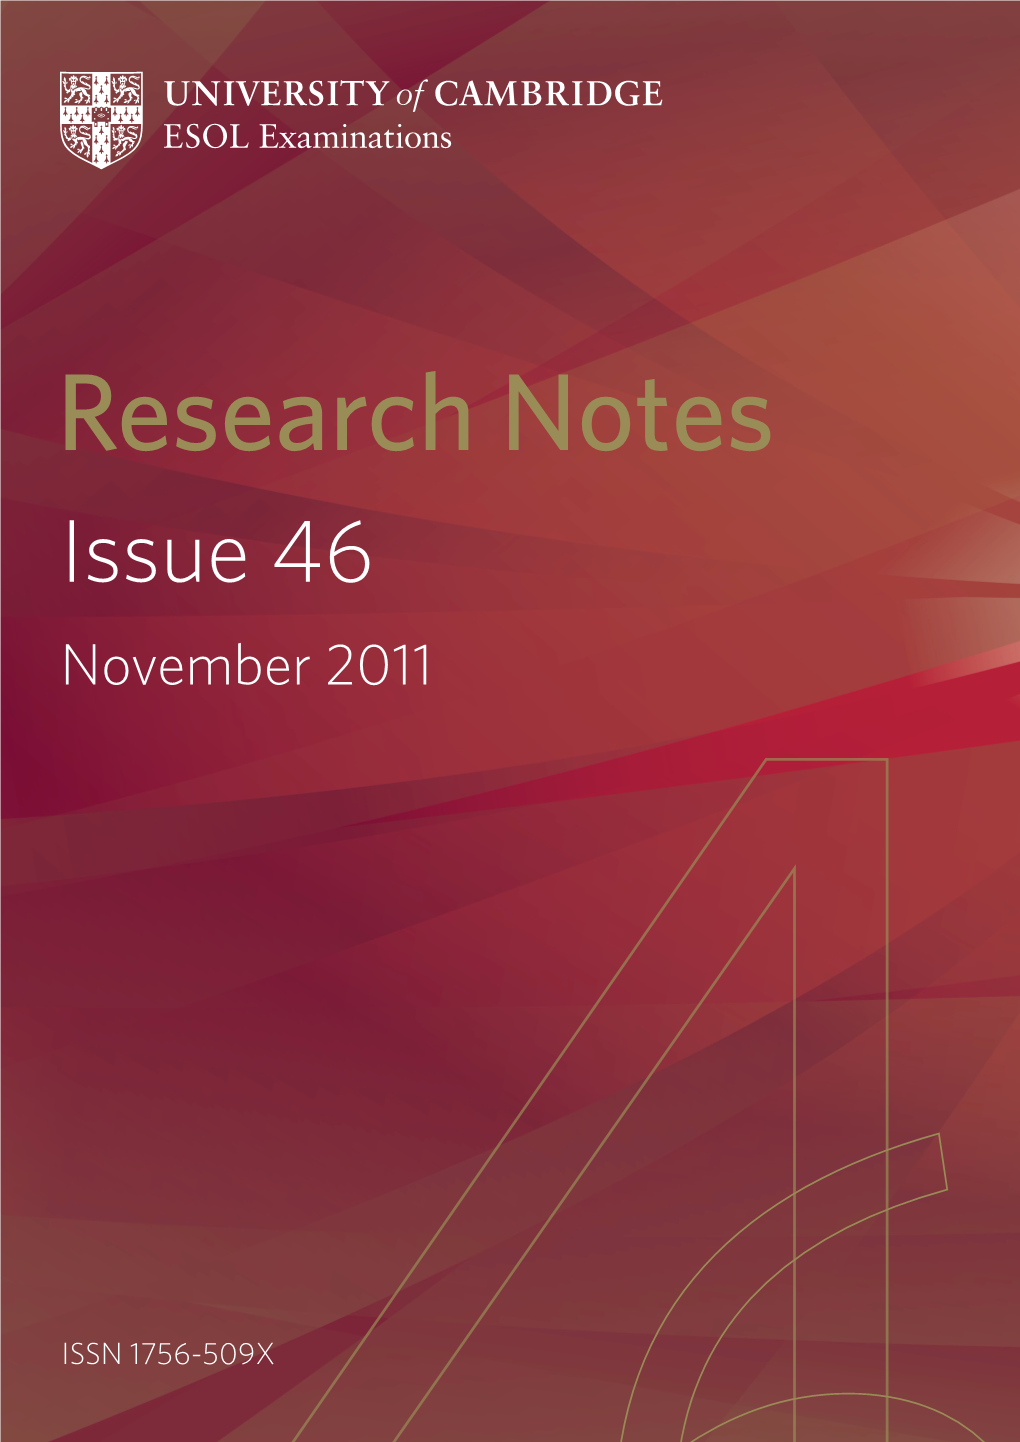 Research Notes Issue 46 November 2011